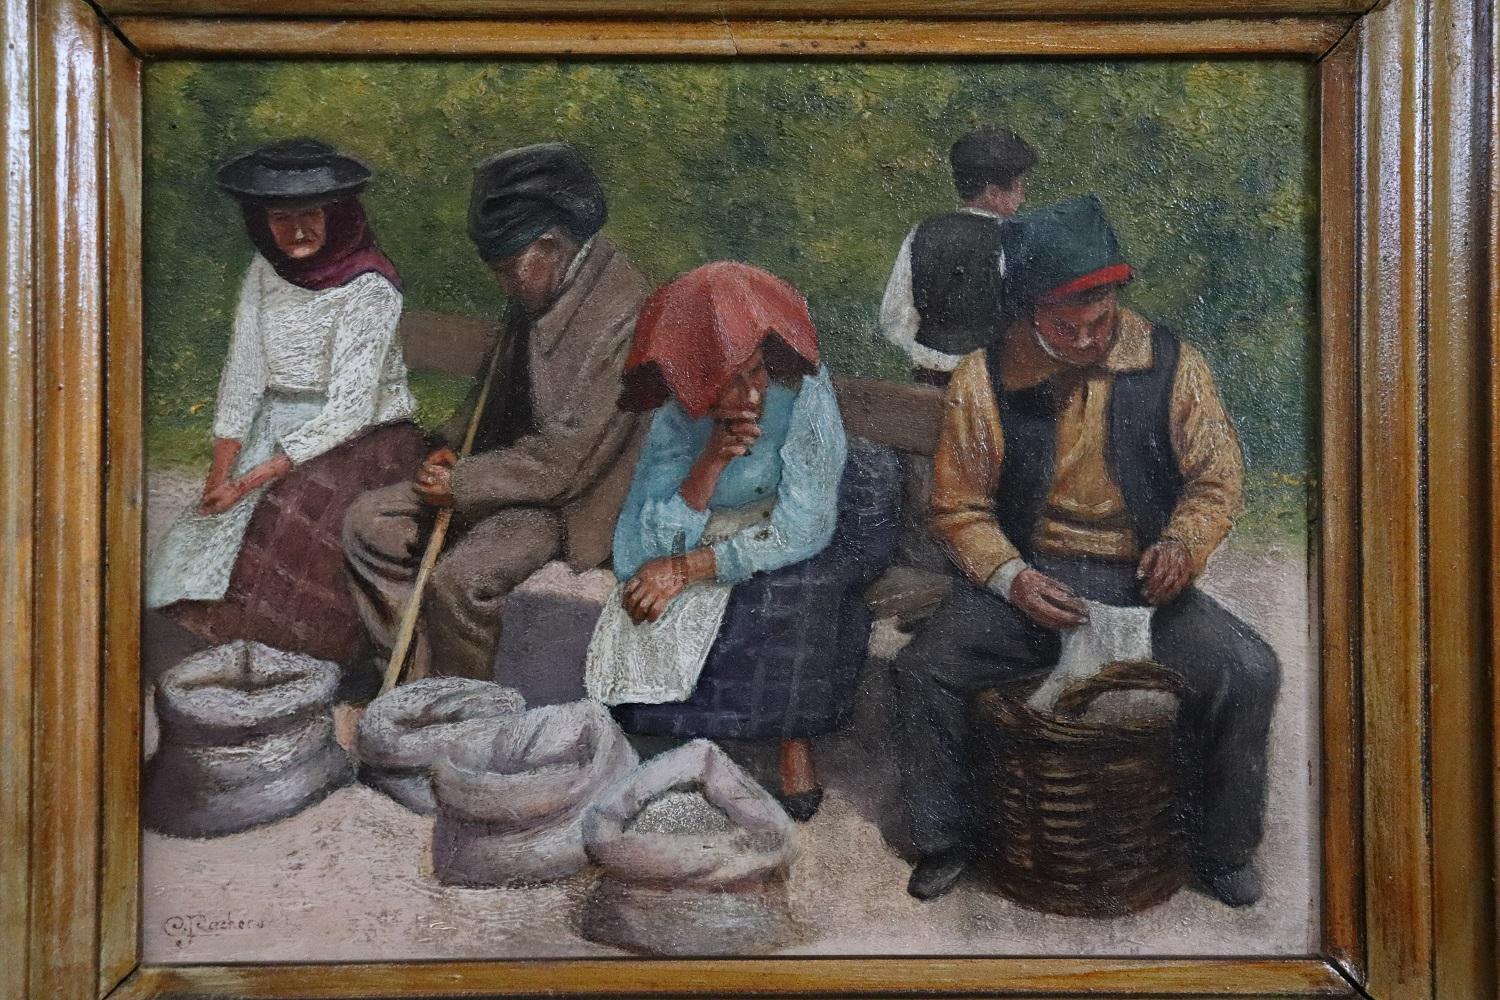 Beautiful early 20th century oil painting on board, signed unidentified artist. The painting is small in size but has a very high artistic quality. A scene of peasants resting during a hot Italian day. Wise use of colors. A painting that fits